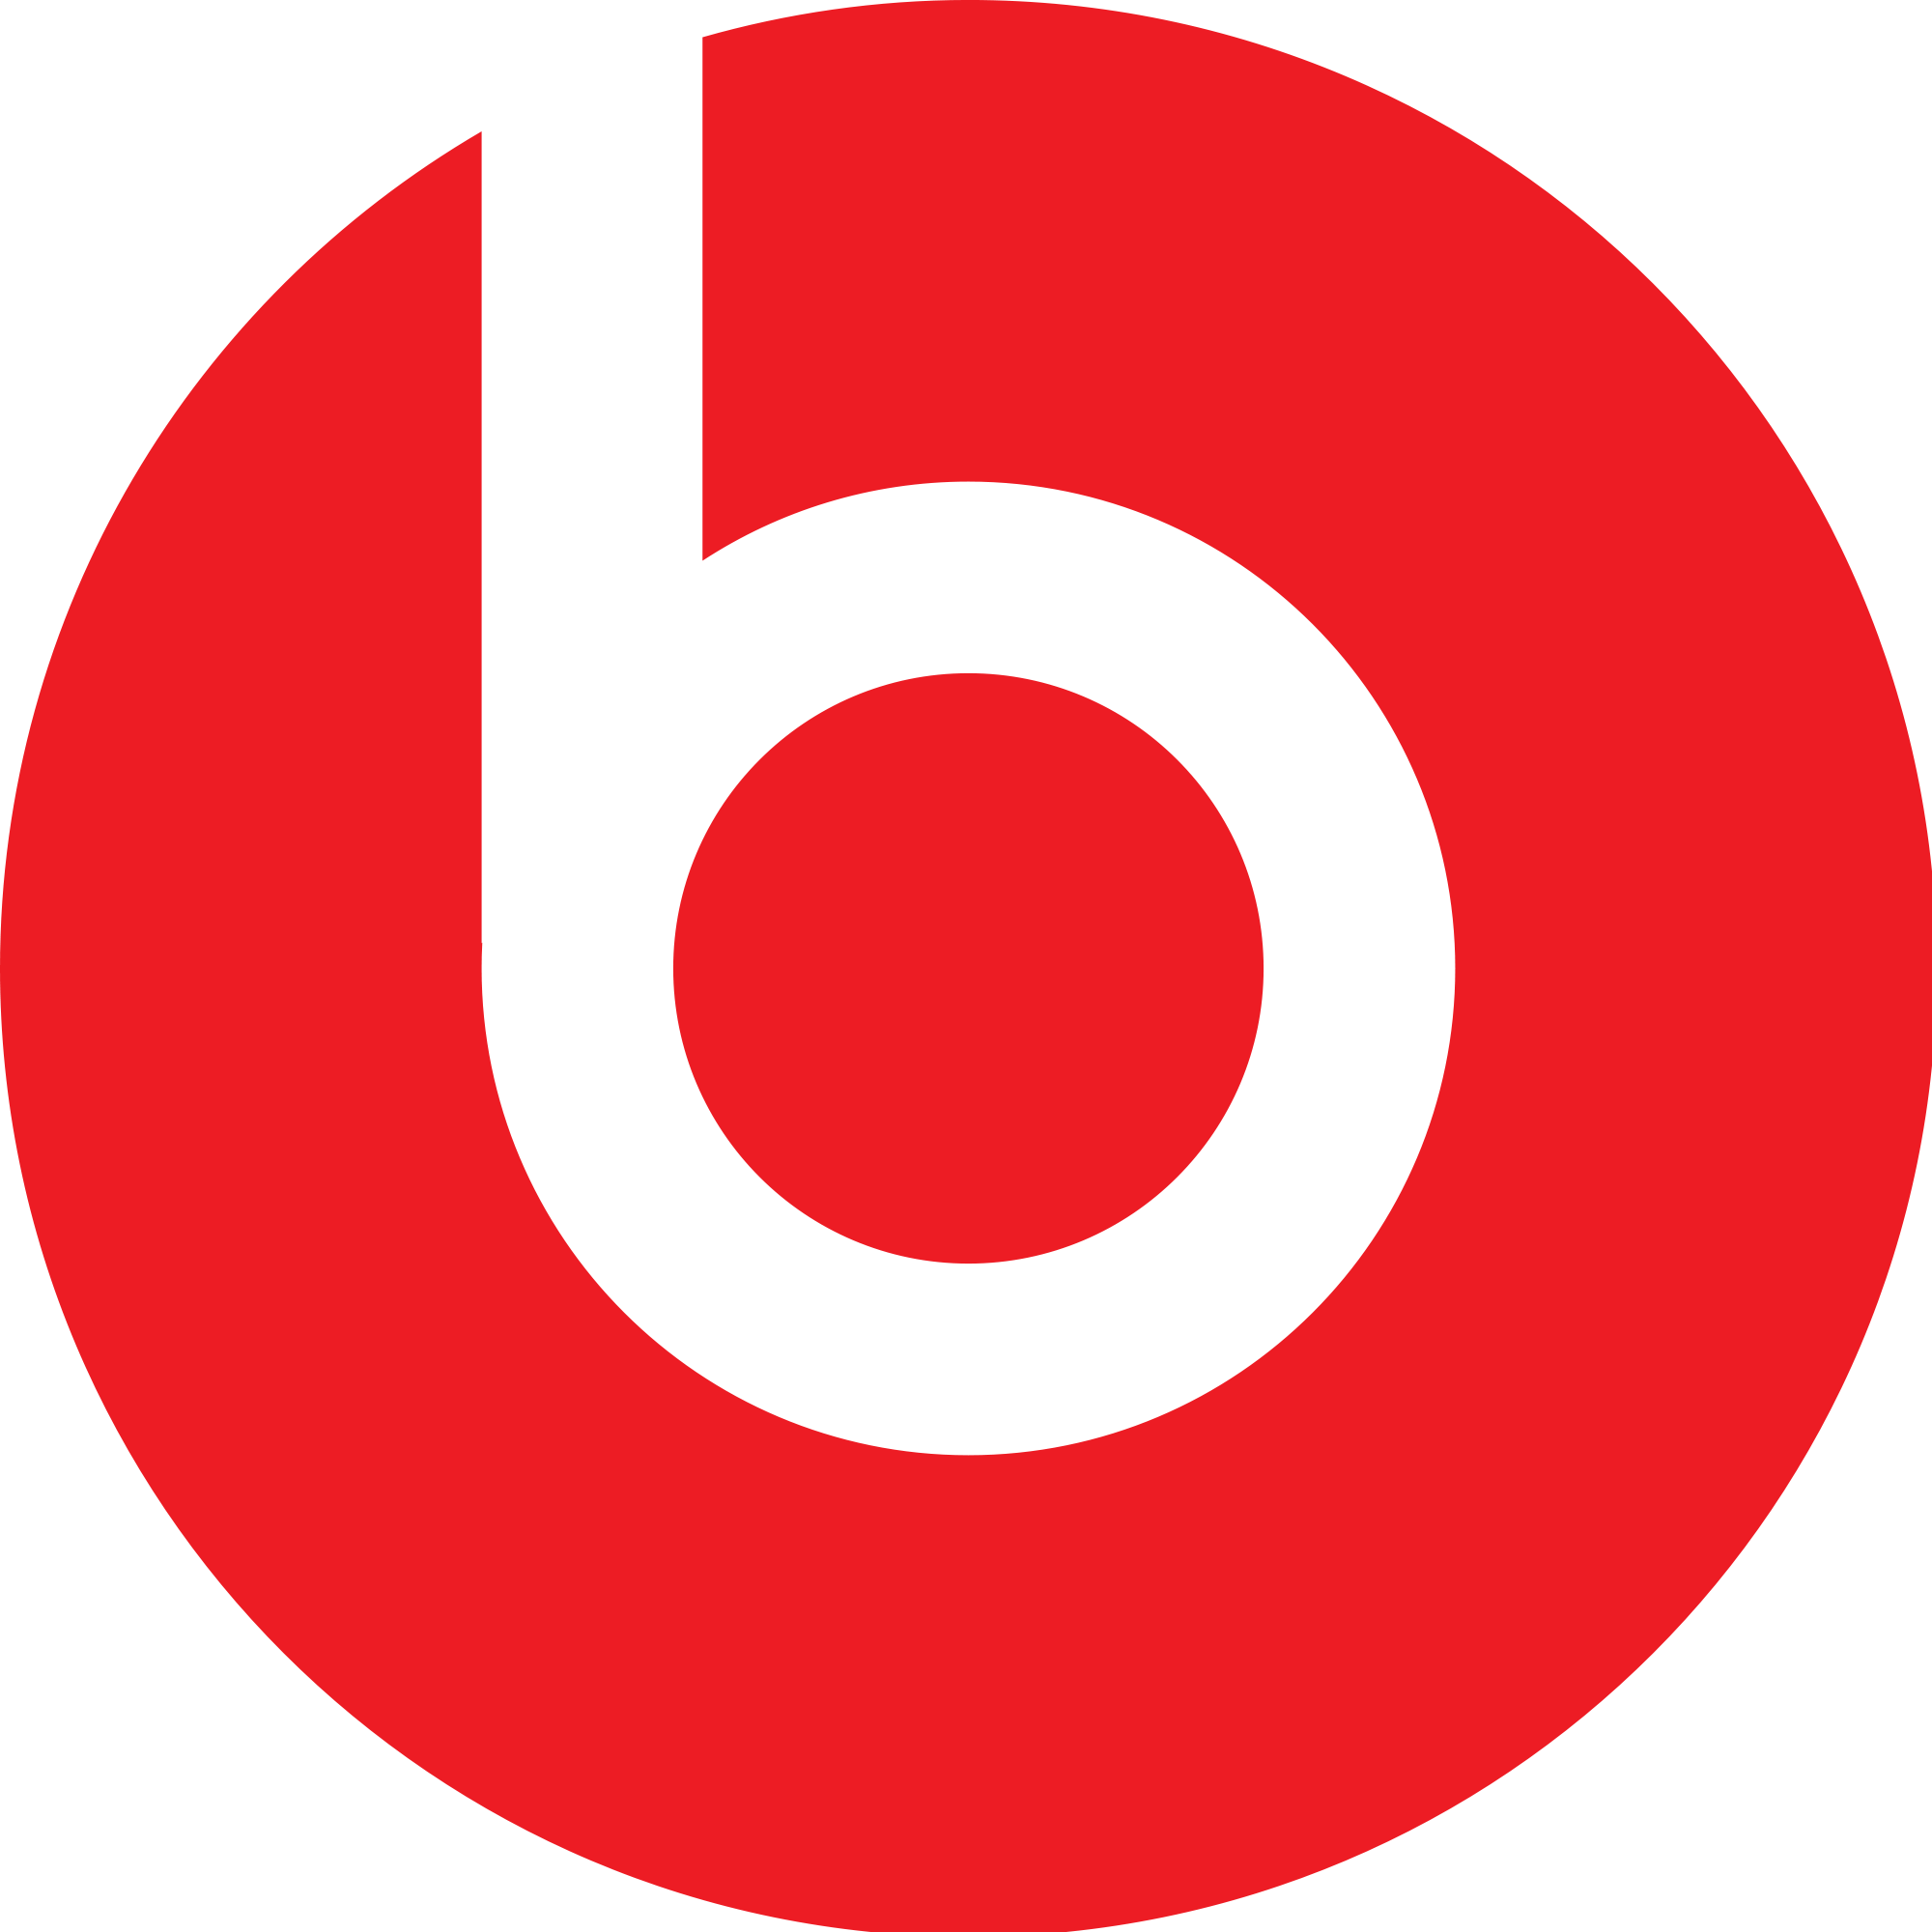 Red Beats Logo - Dr Dre Beats Logo) The positive space looks like a bullseye and the ...